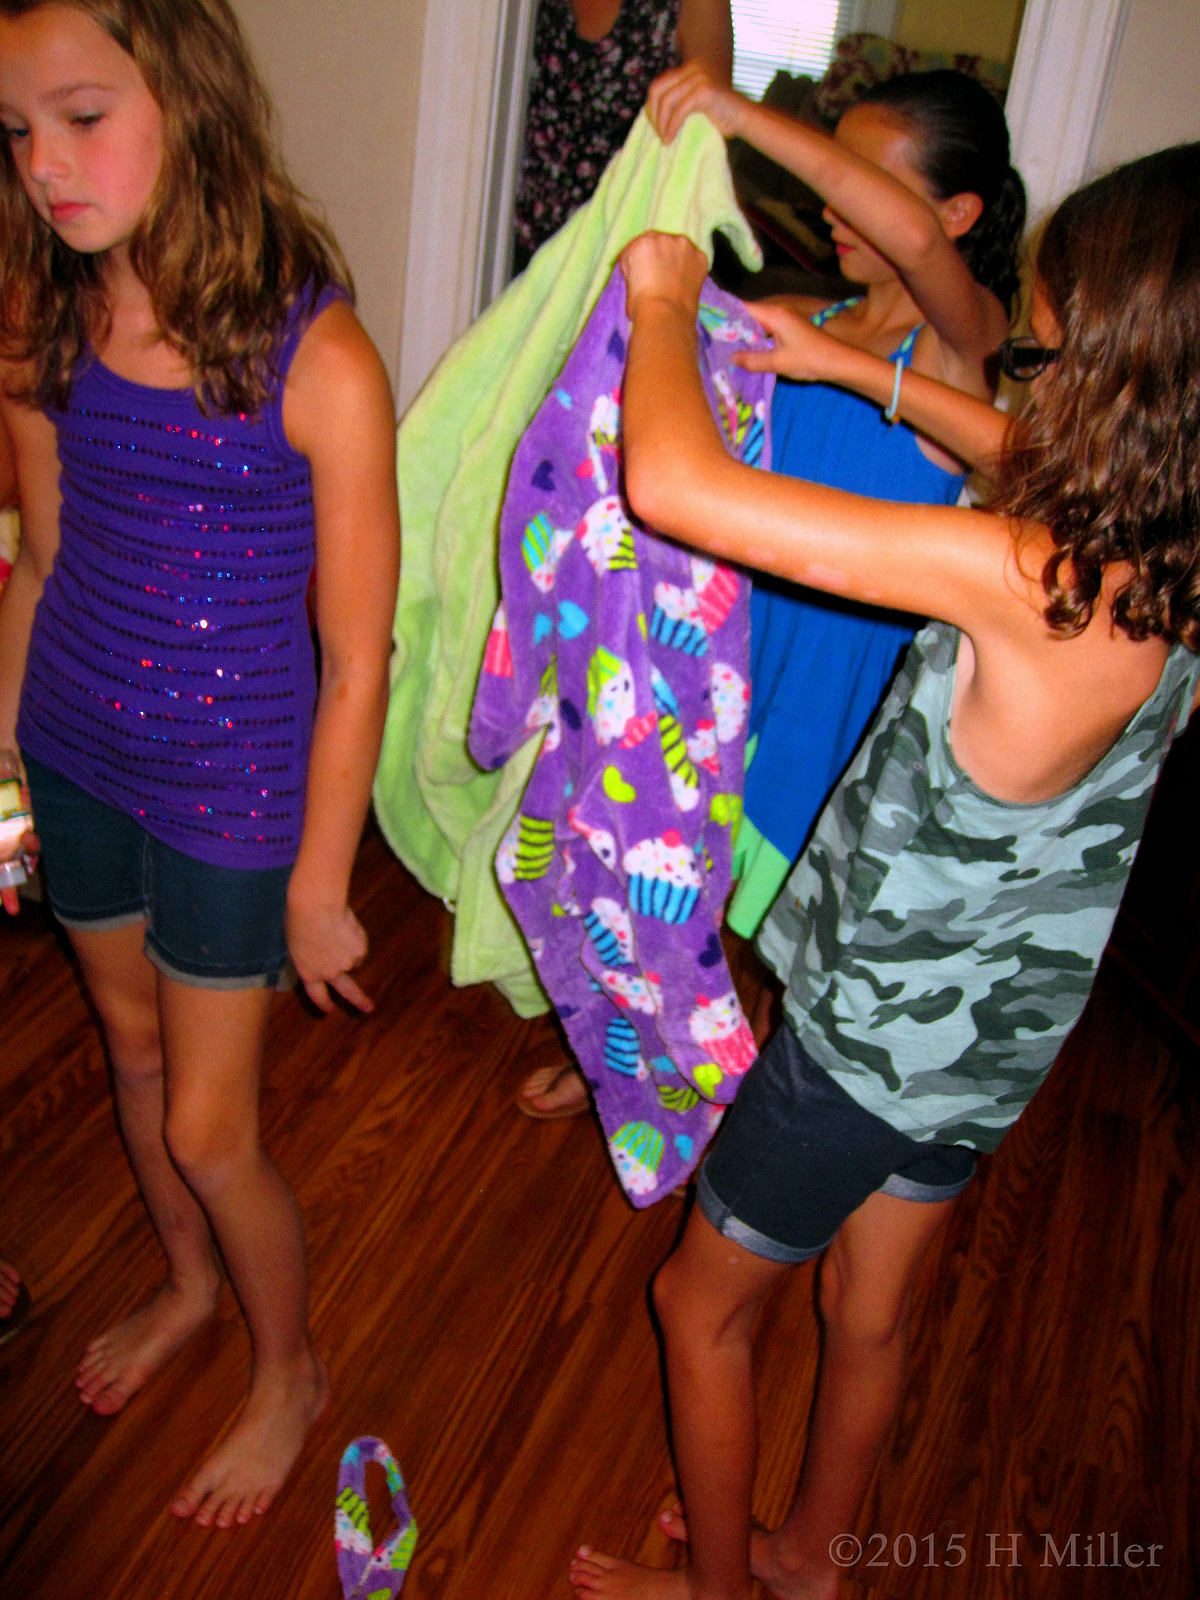 Finding Robes That Are The ProperS ize As Well As Each Girls' Personal Style. 